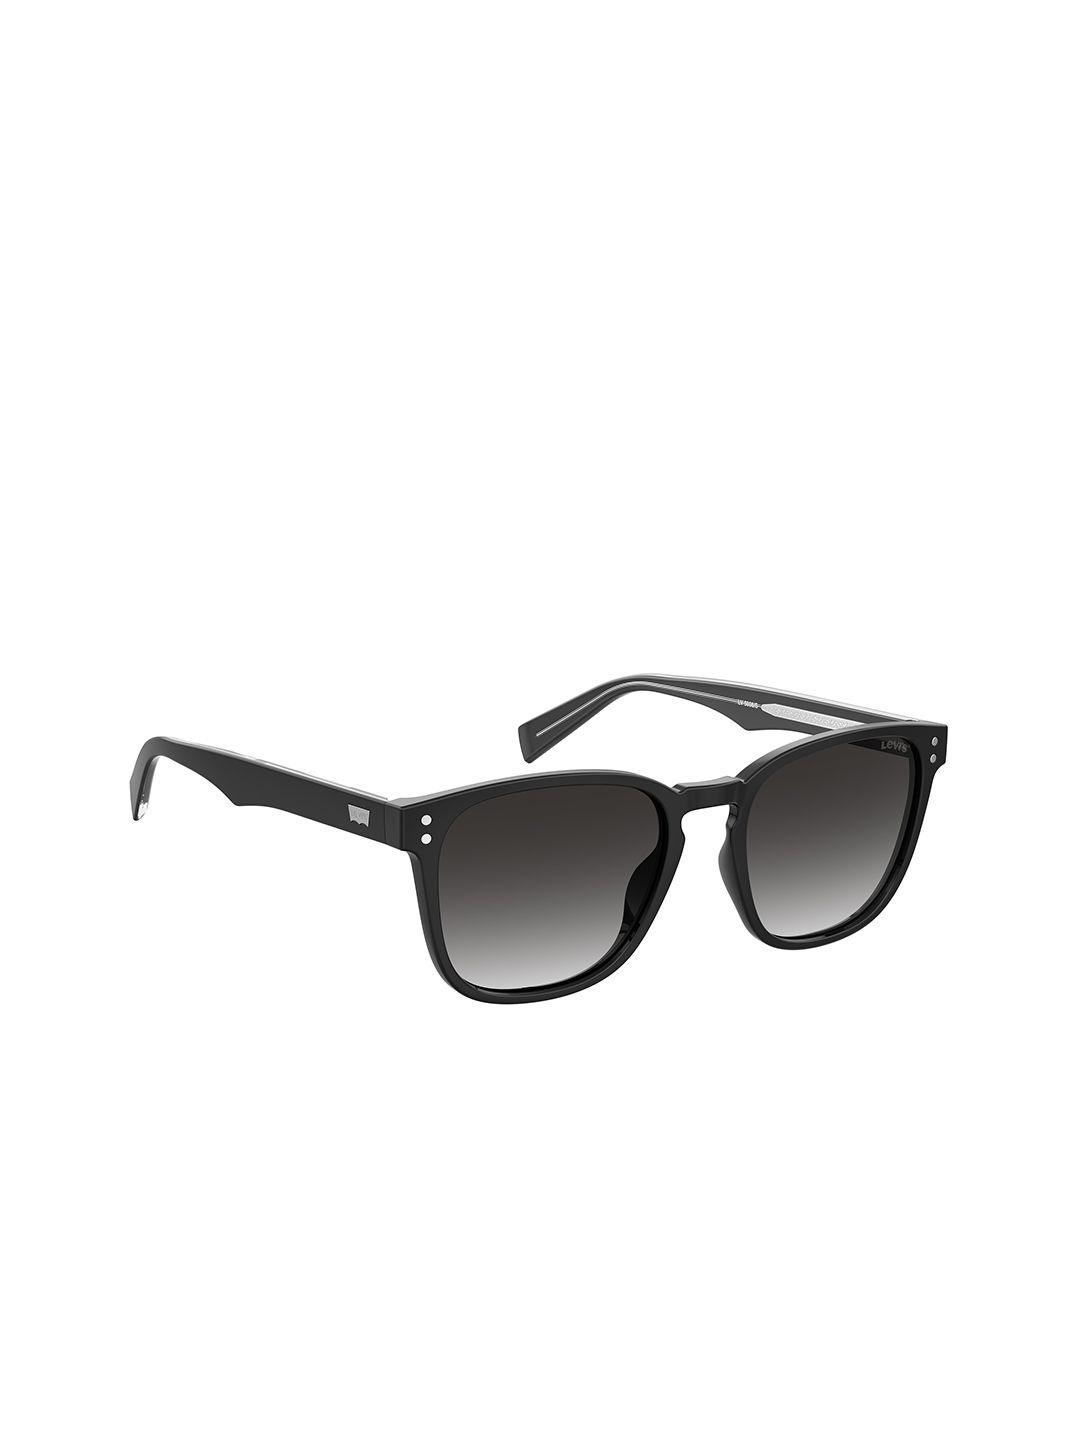 Levis Unisex Grey Lens & Black Aviator Sunglasses with UV Protected Lens Price in India